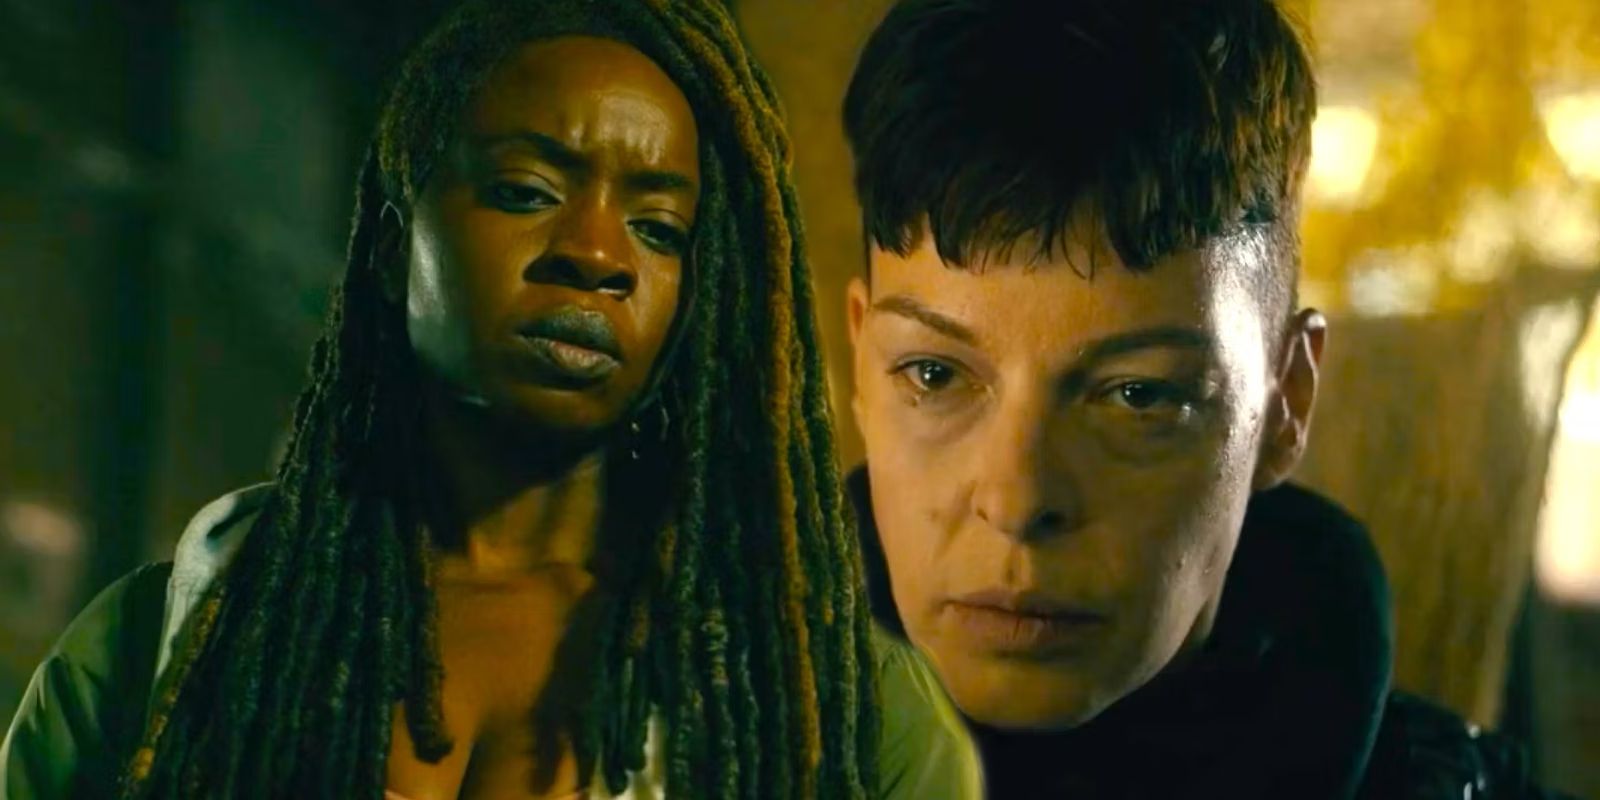 Michonne looking down and Jadis staring in The Walking Dead The Ones Who Live episode 5